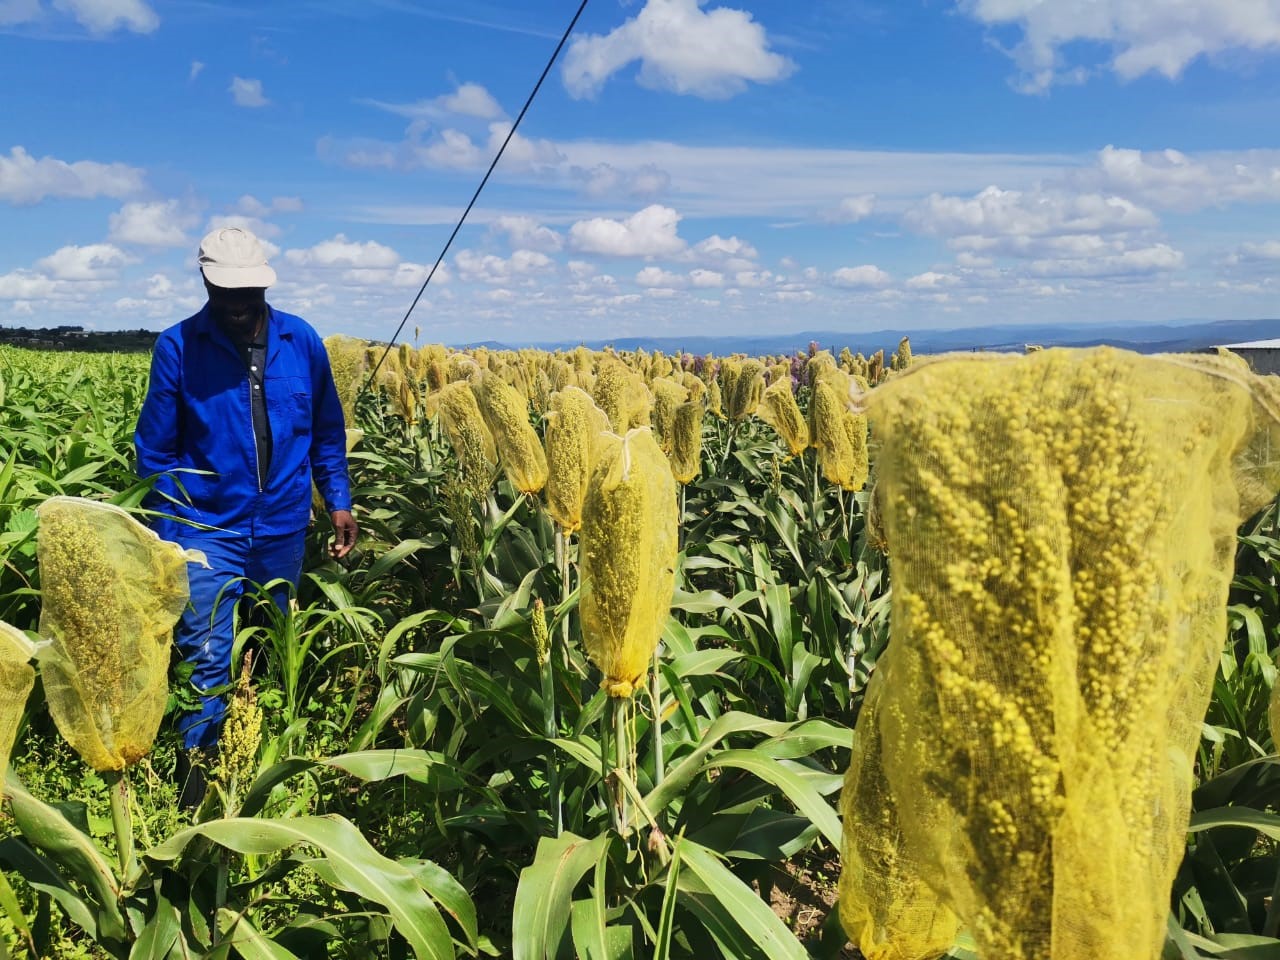 Man walking in a field with sorghum